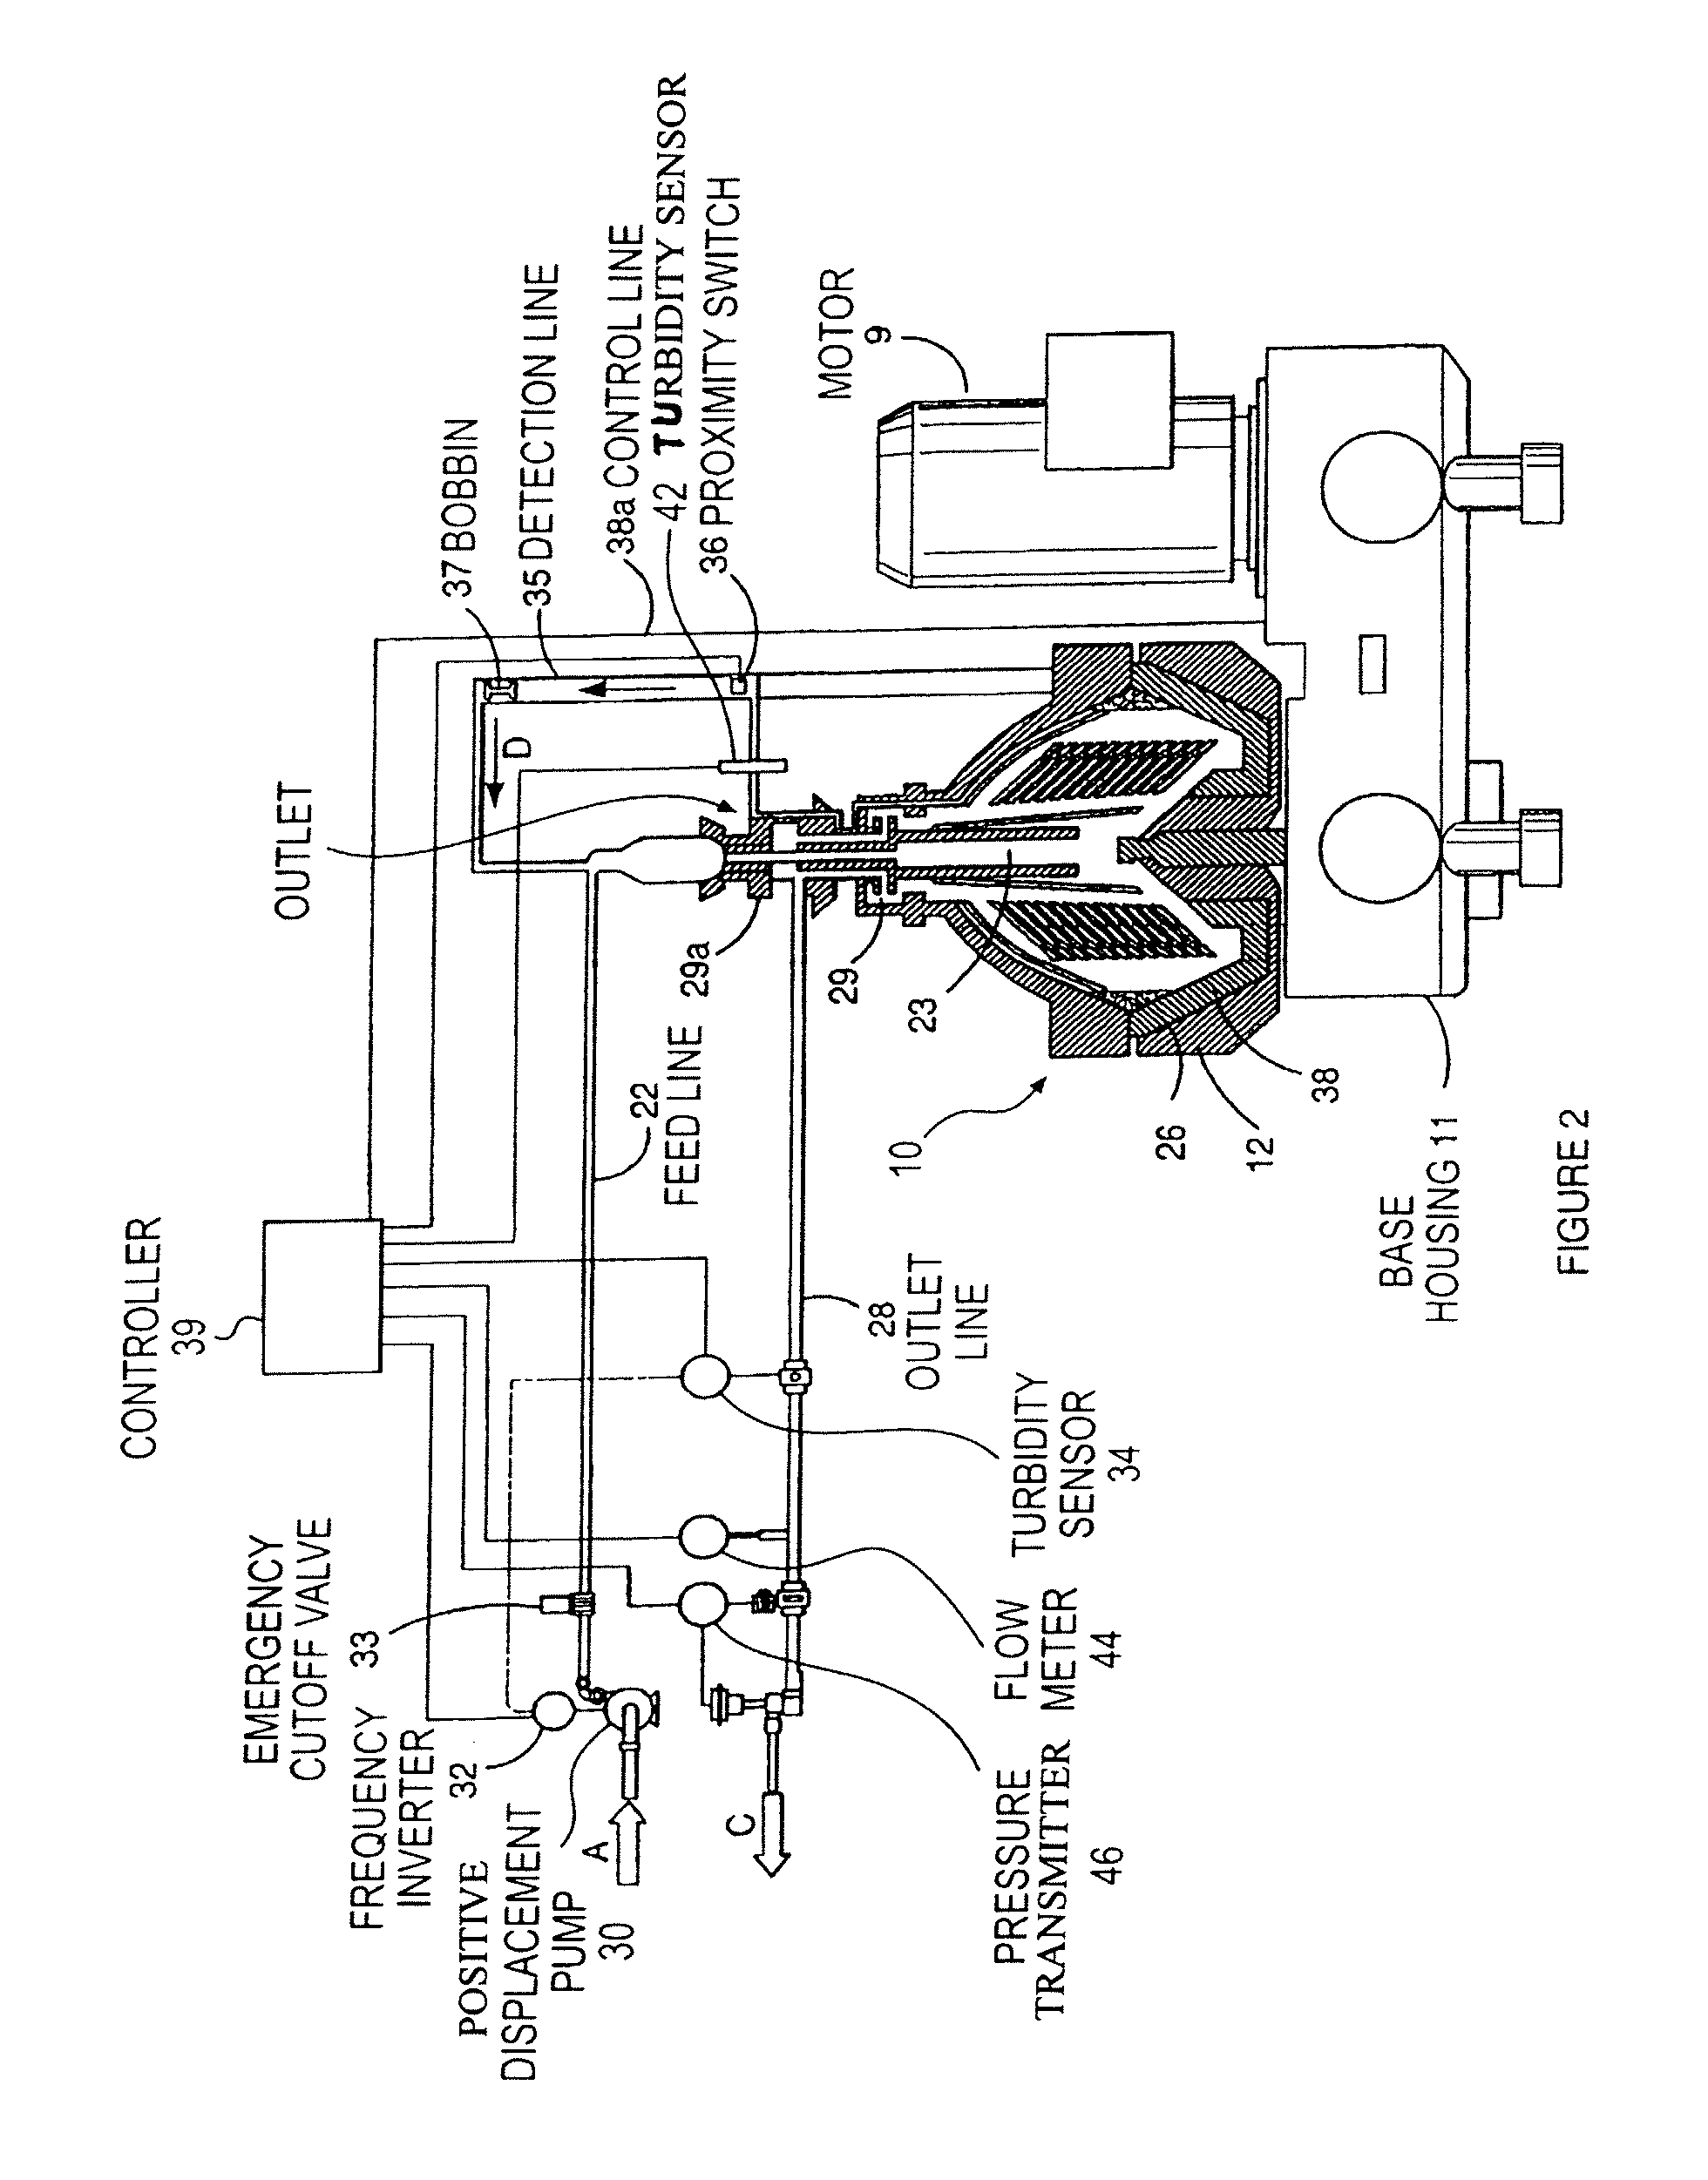 Continuous self-cleaning centrifuge assembly having turbidity-sensing feature